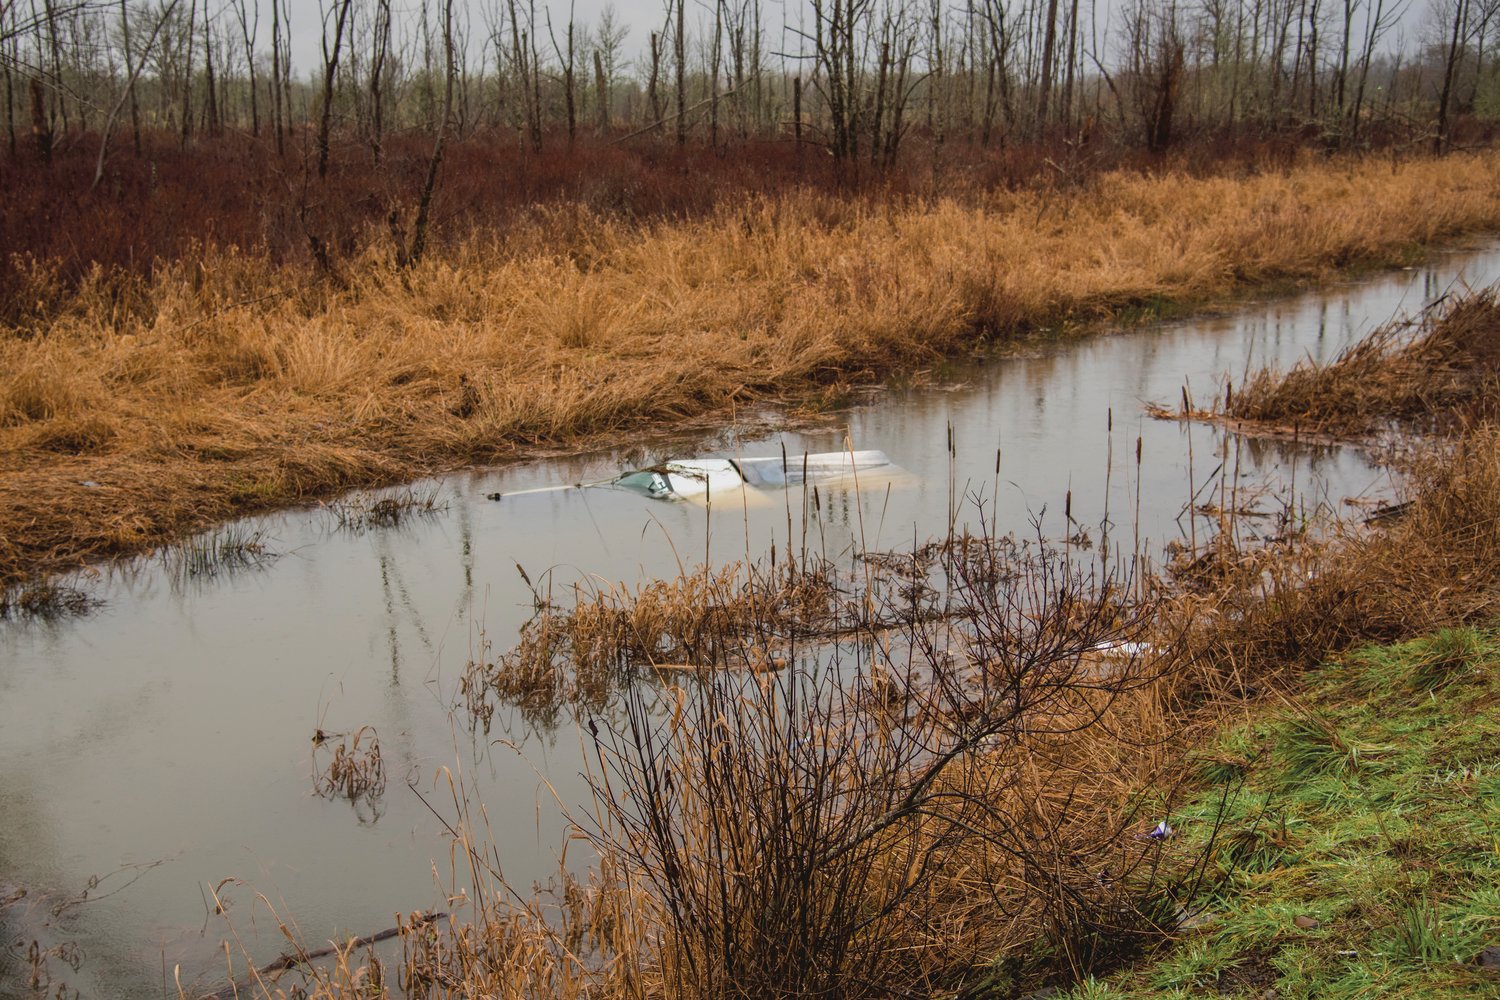 A vehicle remains submerged in the 2100 block of North National Avenue in Chehalis Wednesday morning.